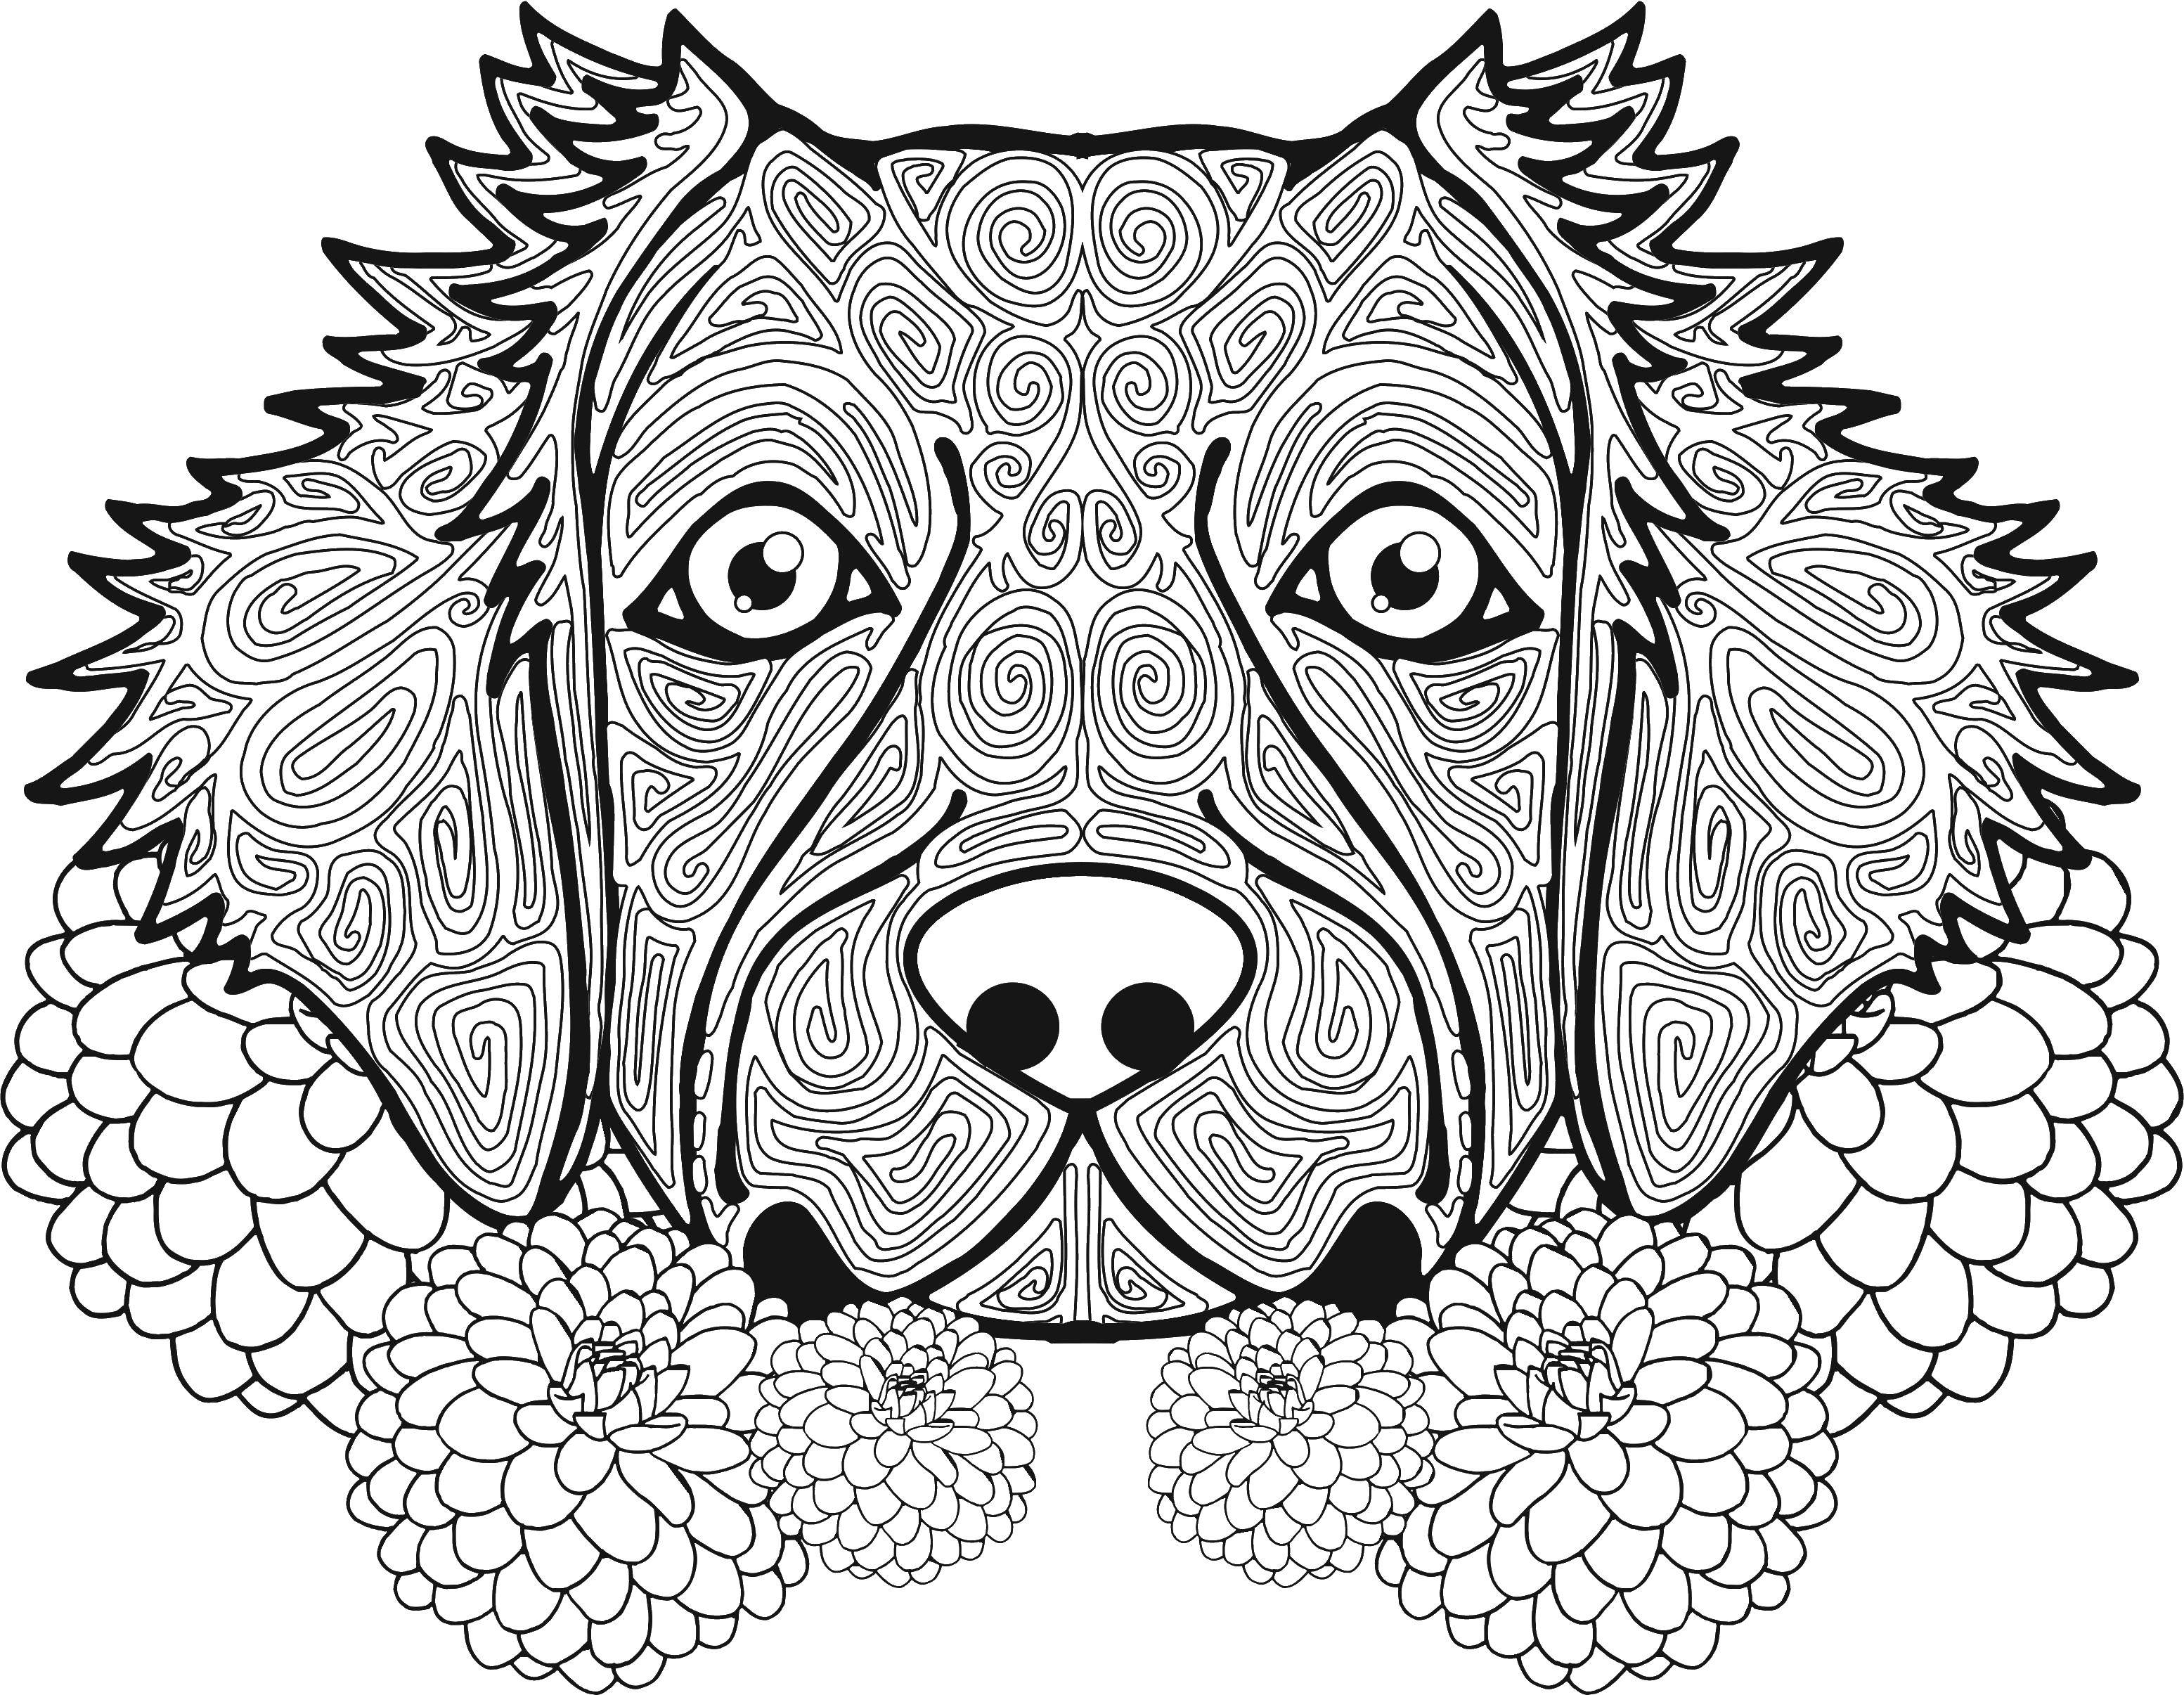 Coloring Dog patterns. Category coloring antistress. Tags:  the dog, patterns, flowers.